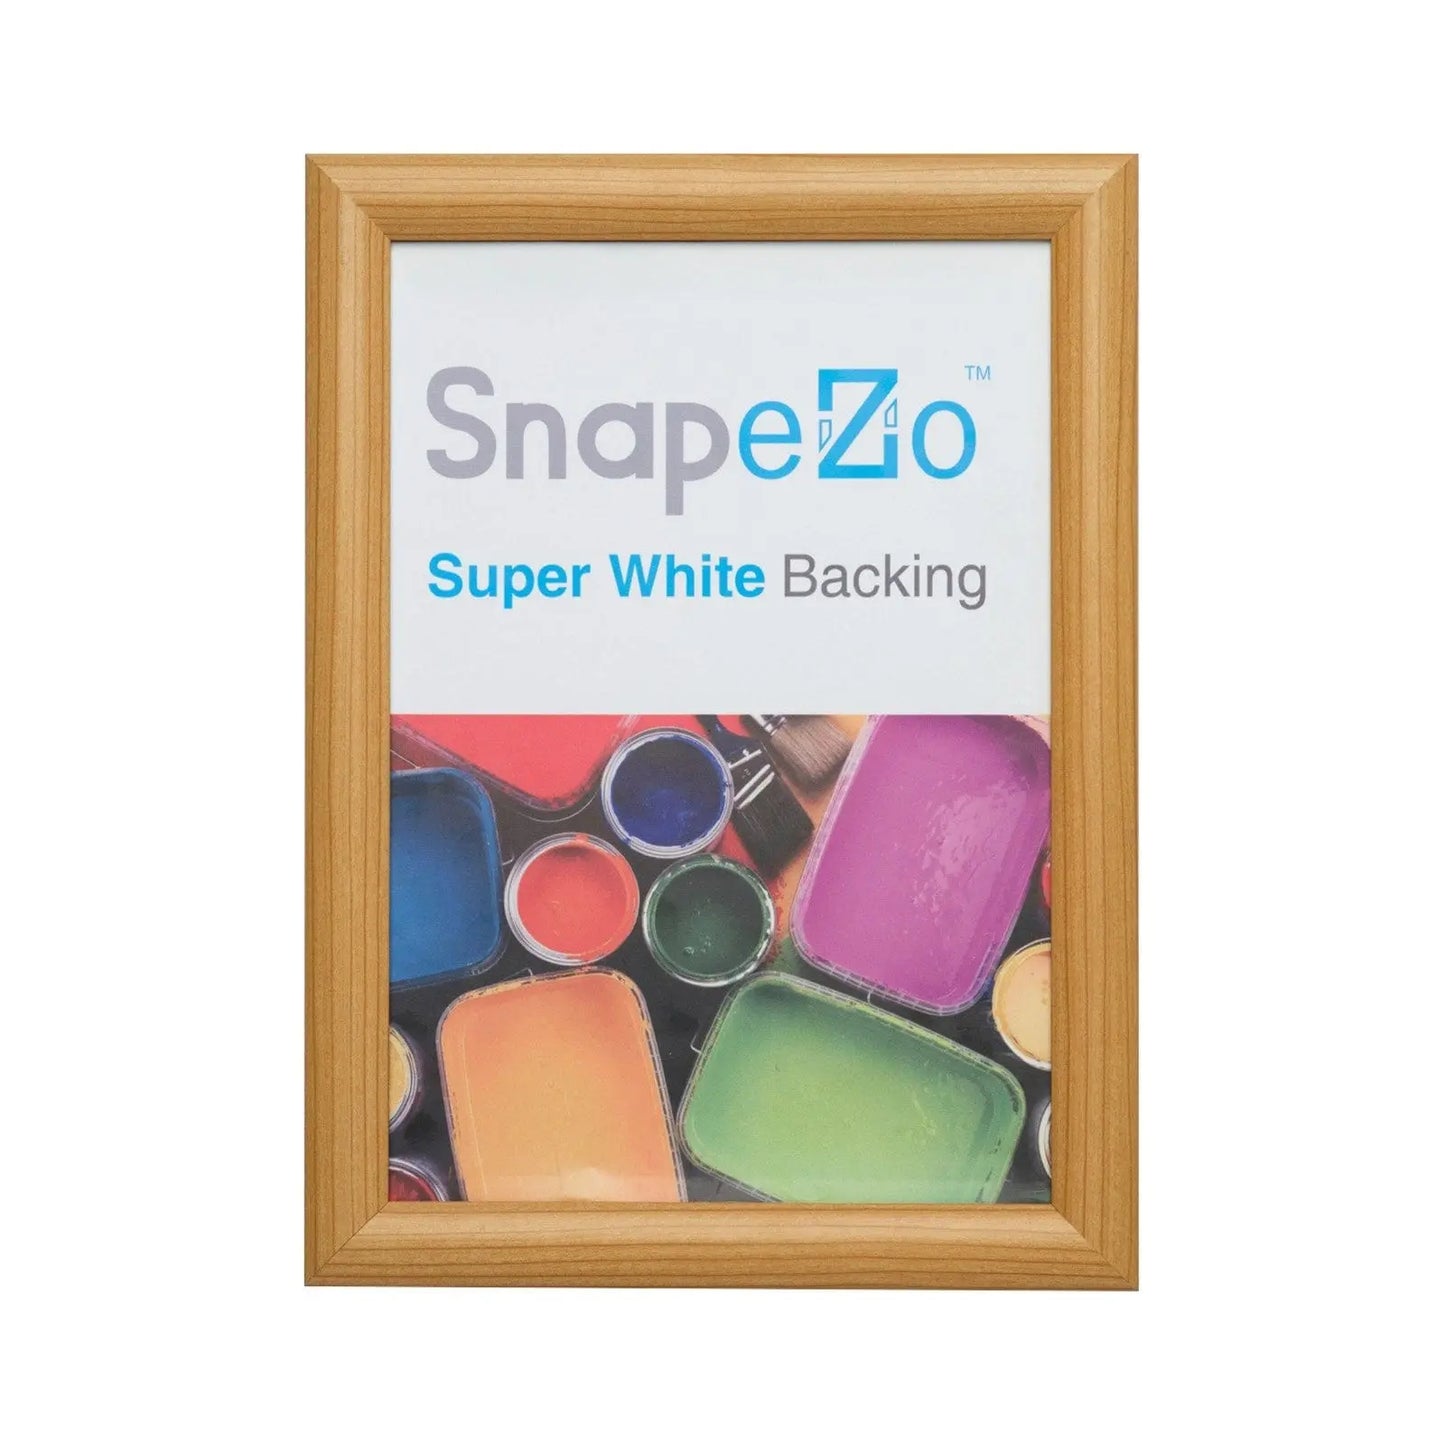 Light Wood certificate snap frame poster size 8x10 - 1 inch profile - Snap Frames Direct